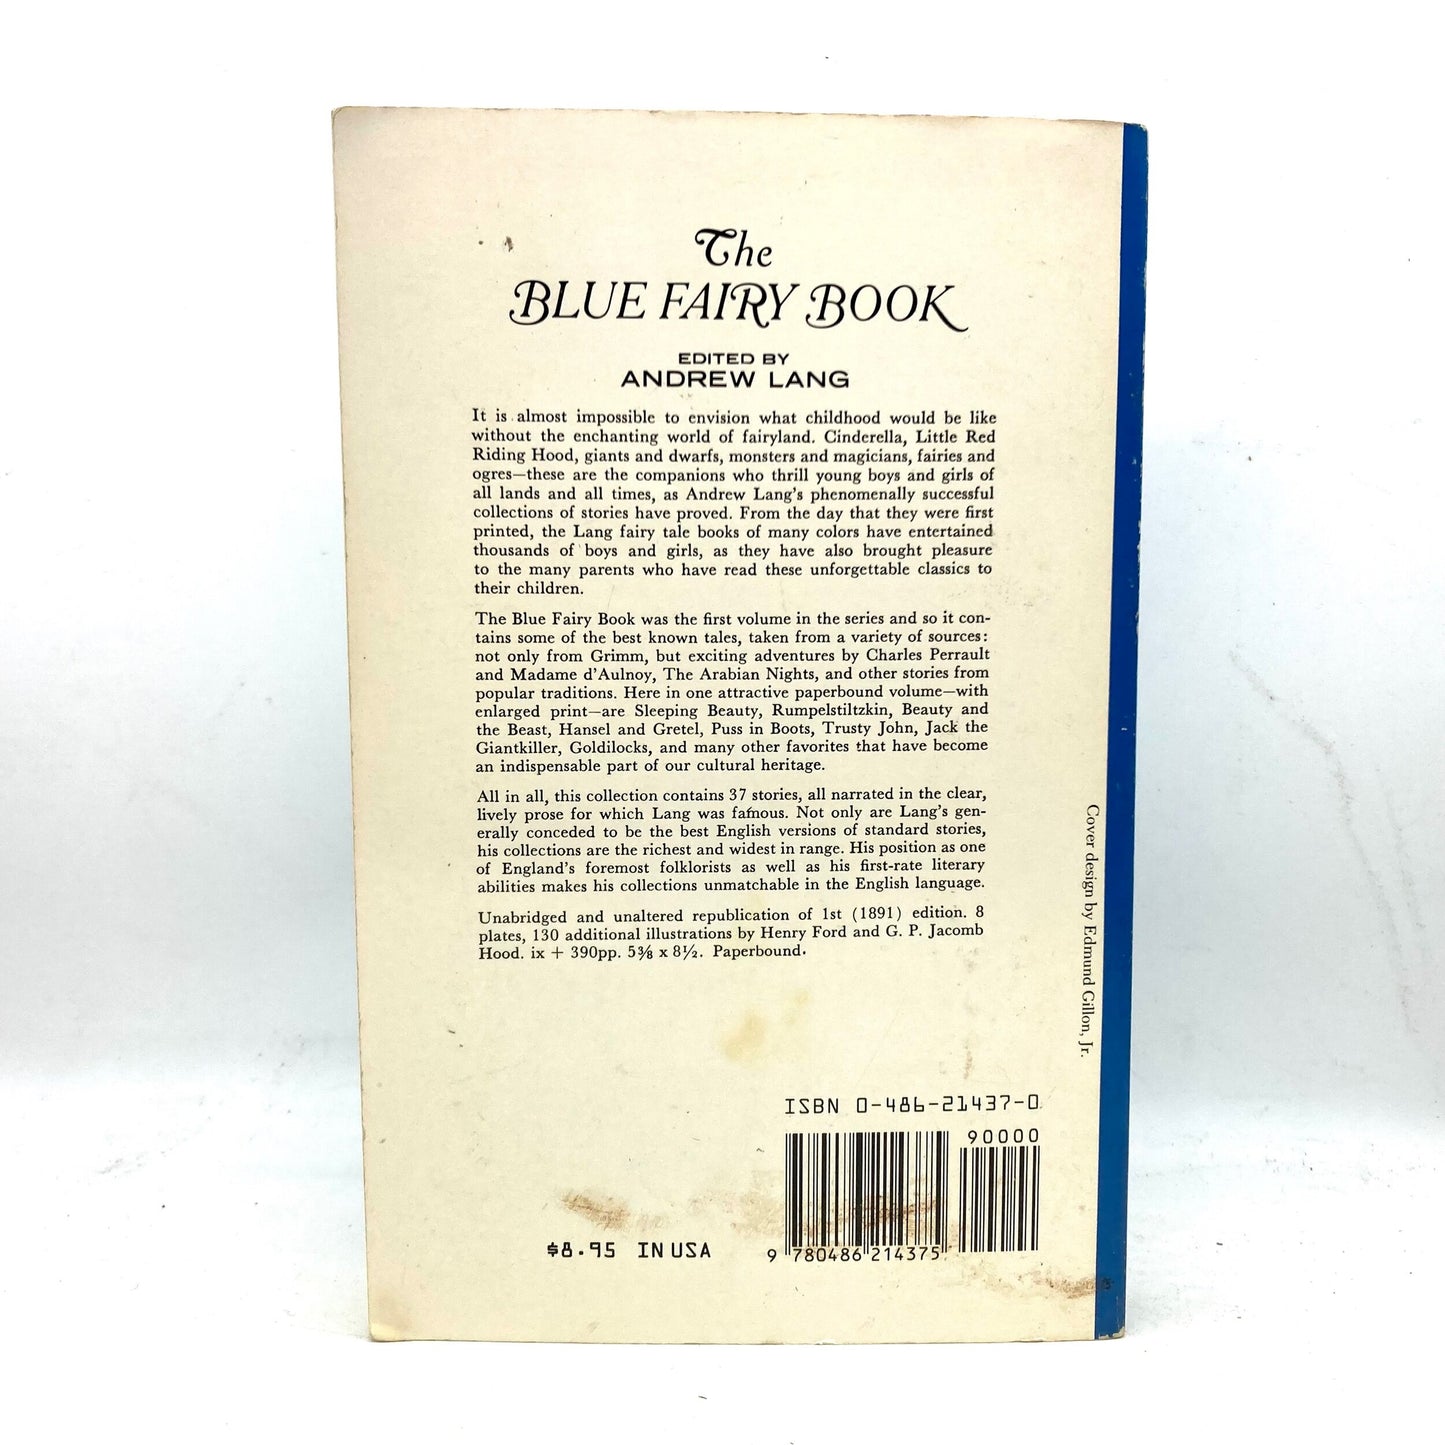 LANG, Andrew "The Blue Fairy Book" [Dover, 1965] - Buzz Bookstore